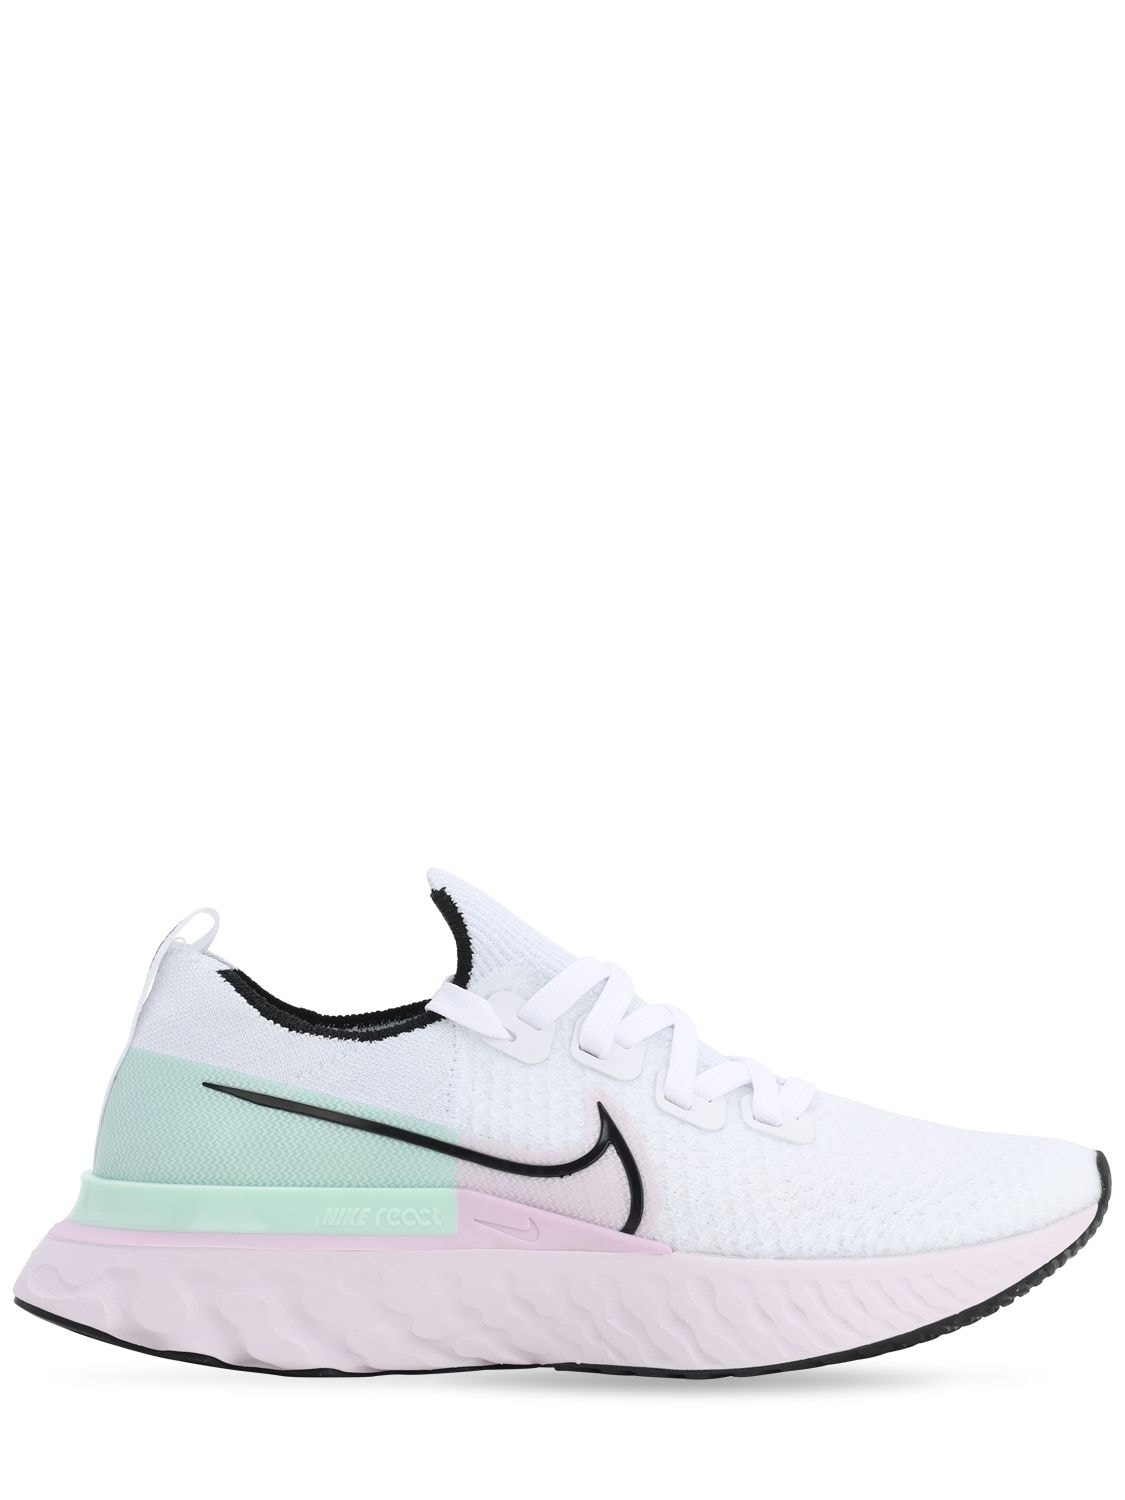 Buy Epic React Pro Flyknit Sneakers for 